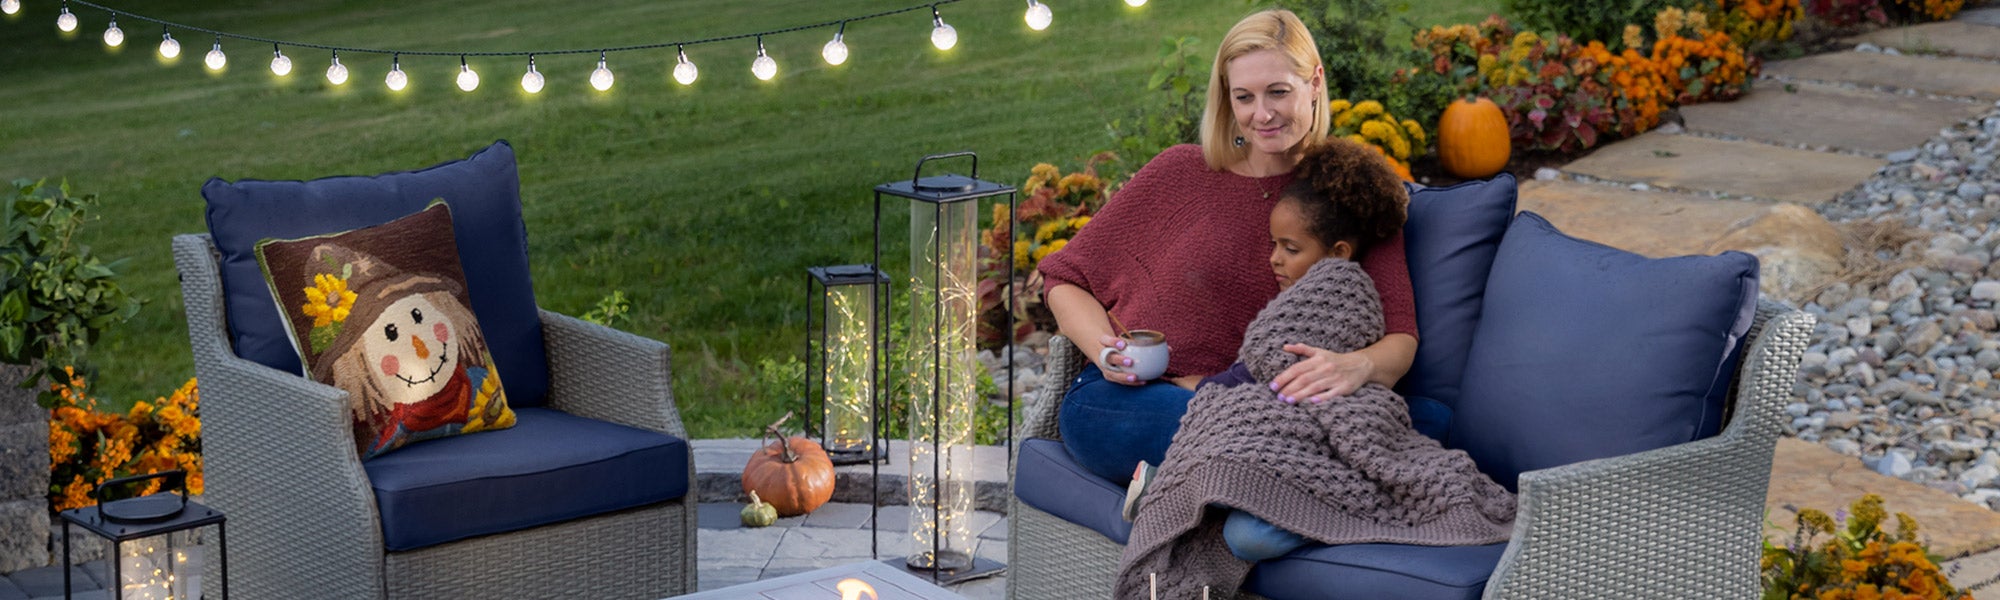 mother and child cuddling in front of outdoor fire pit